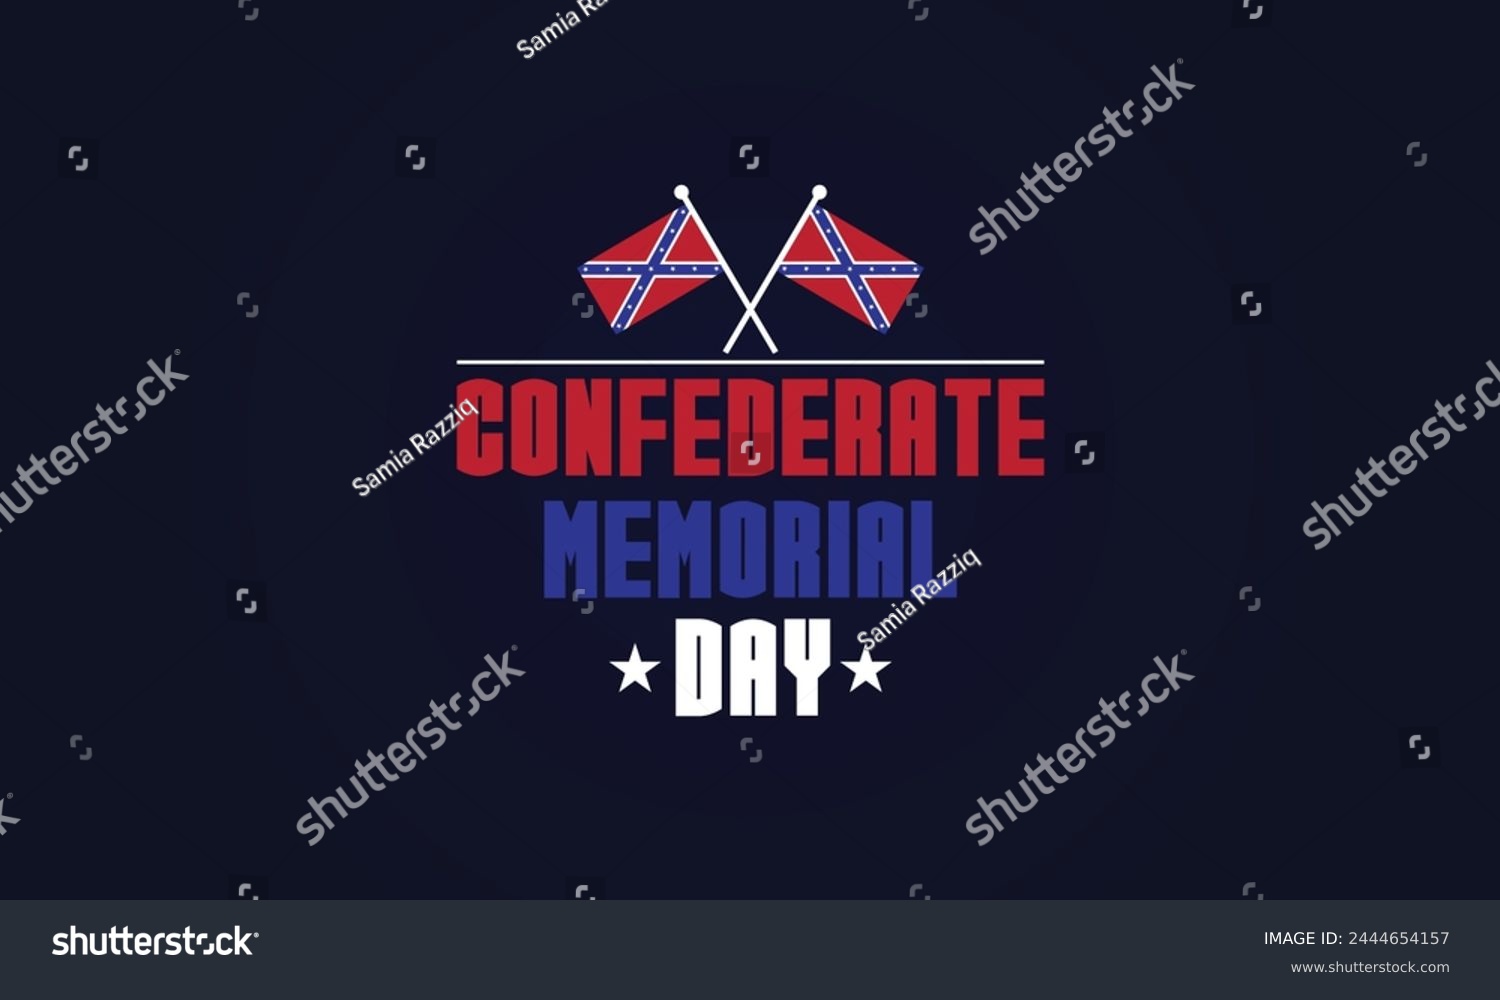 SVG of Remembering History Confederate Memorial Day Flag Design Inspiration svg